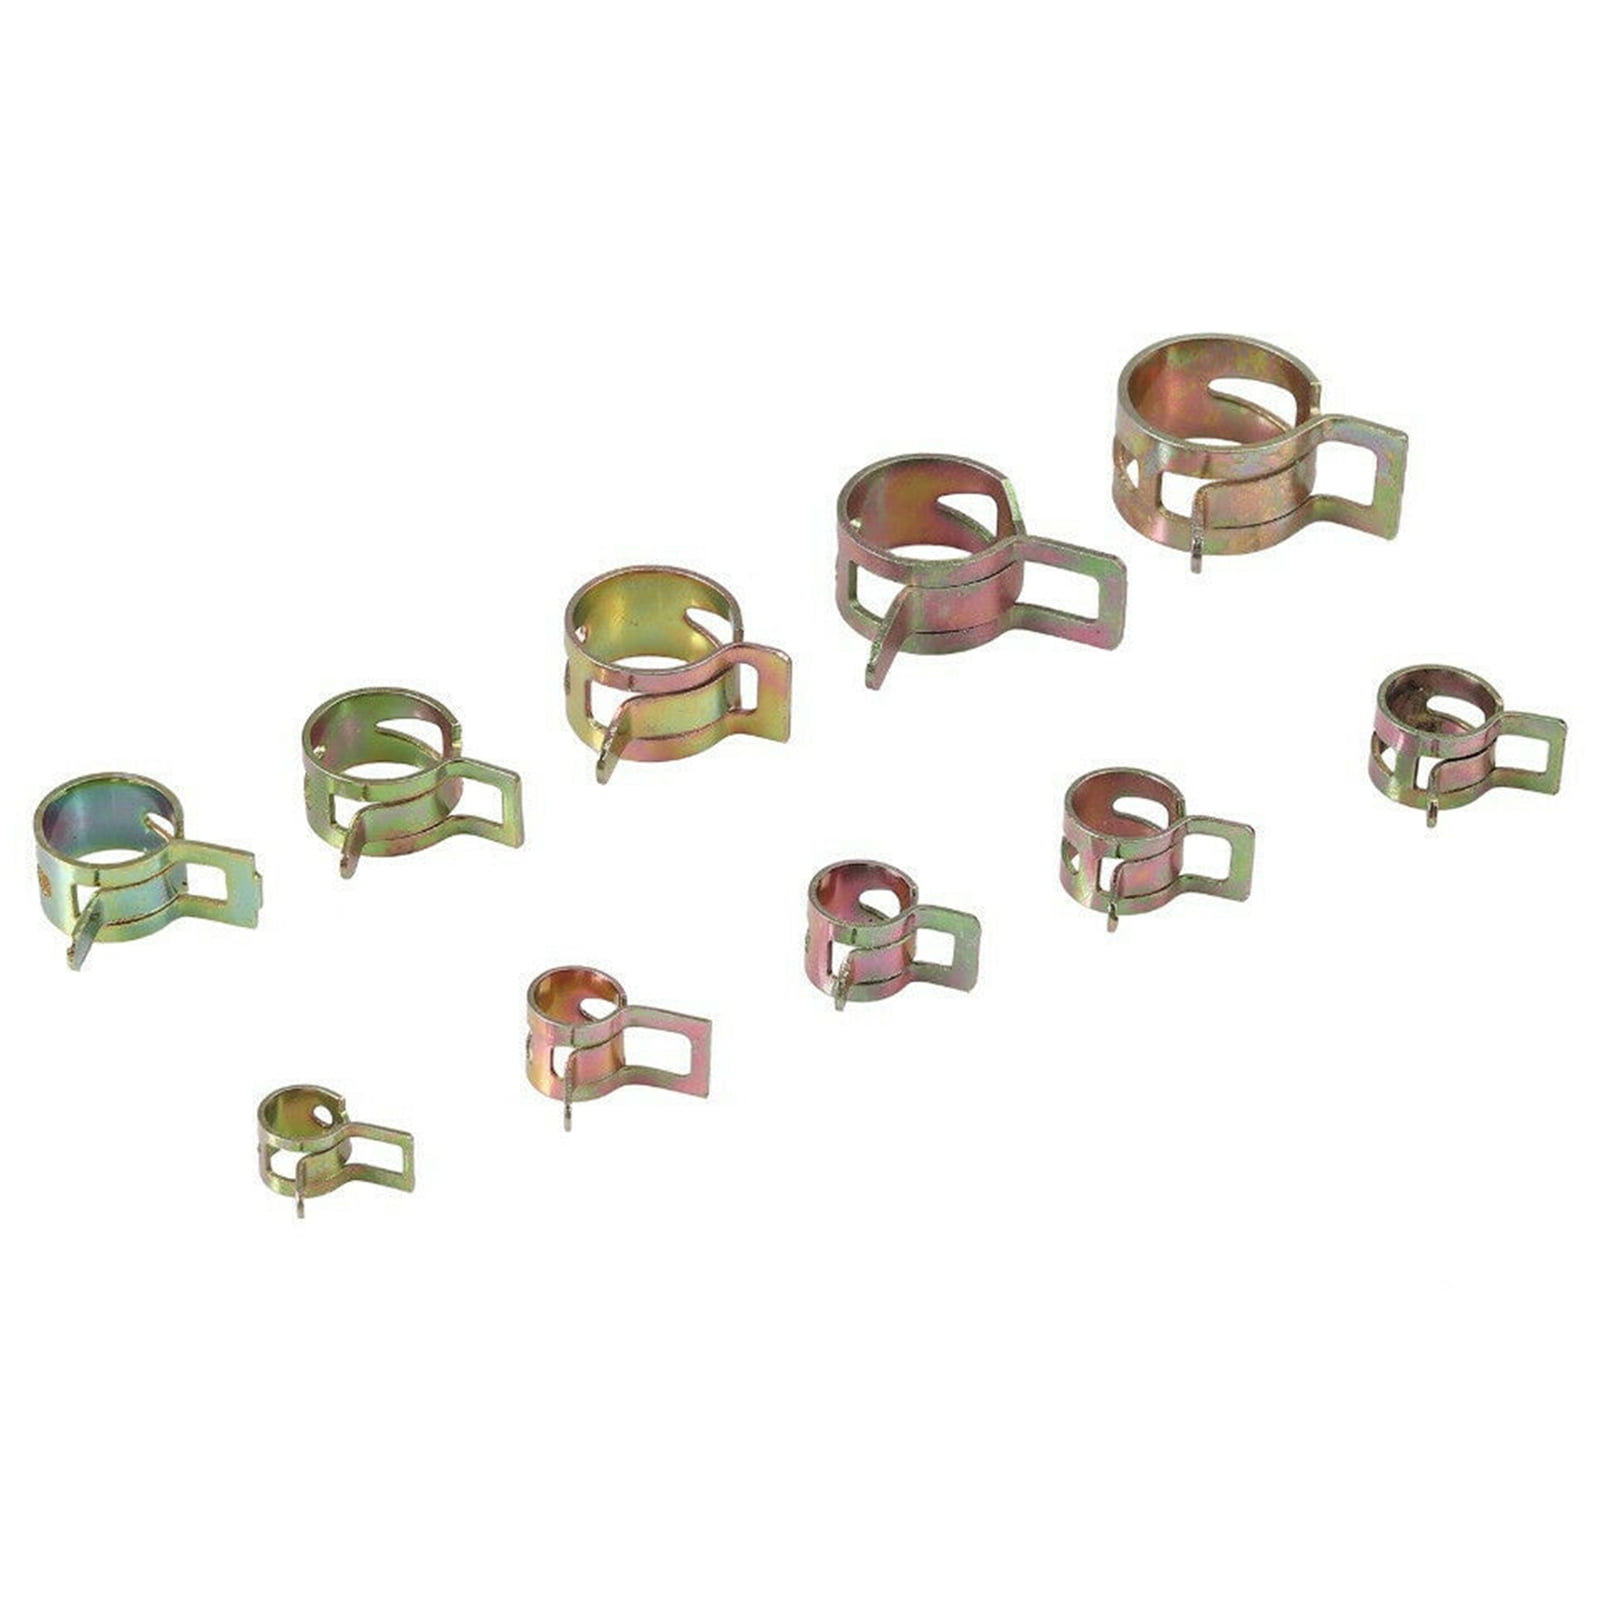 Spring Hose Clips/Fuel Clamps Mikalor Air Gas Water Pipe Self Clamping 10 Pack 